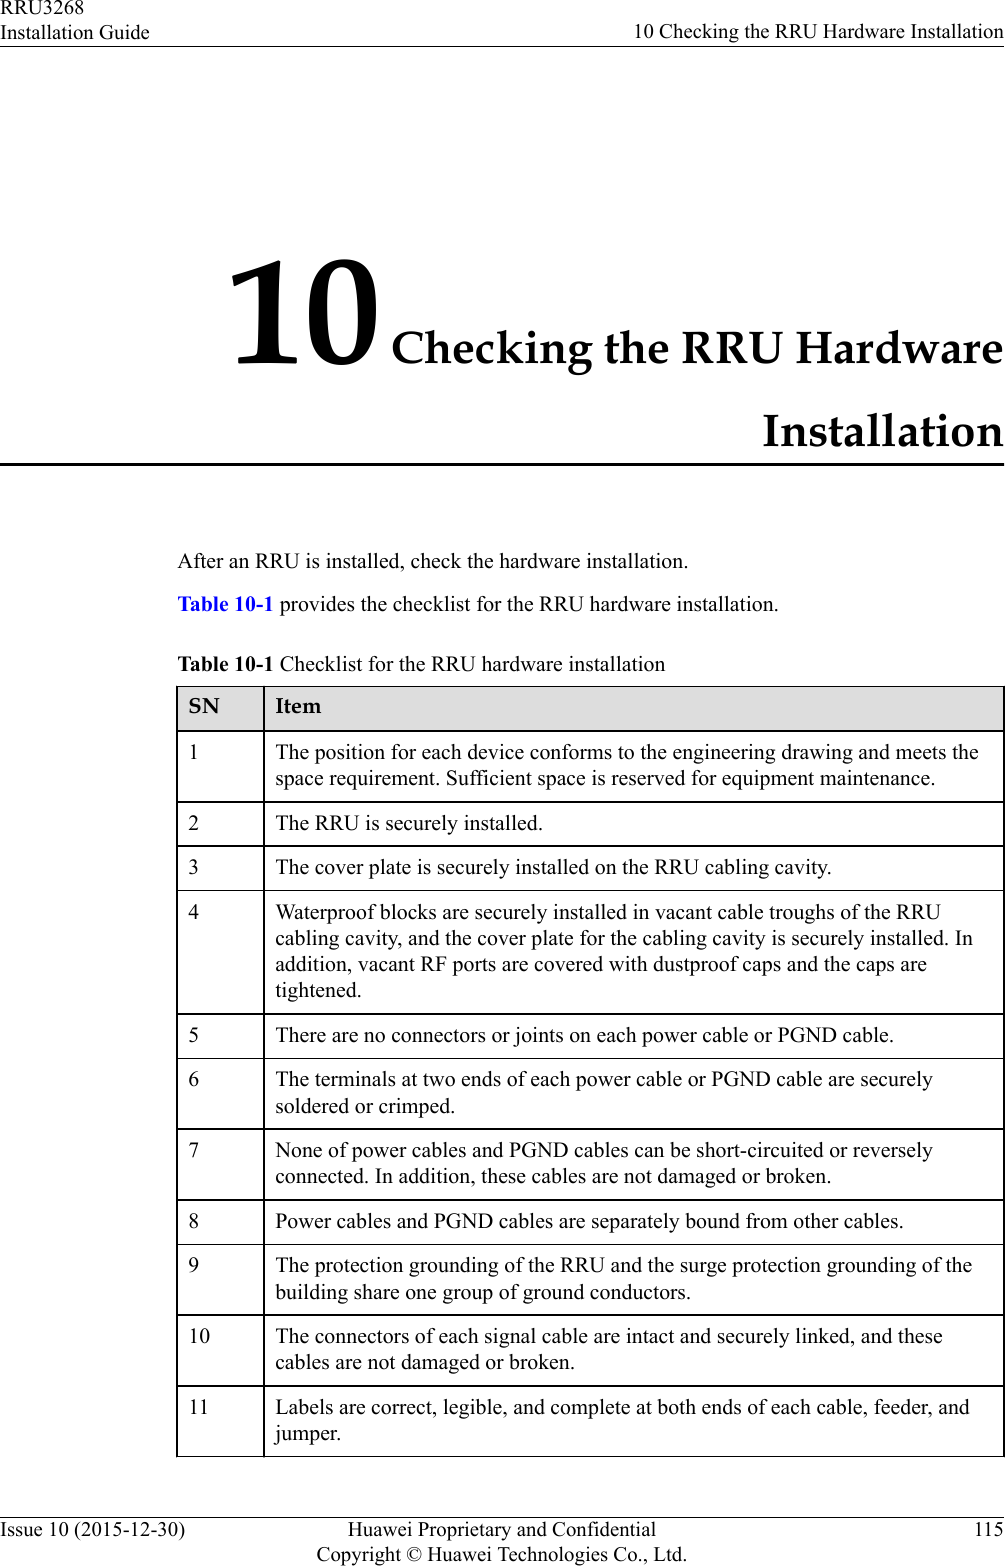 10 Checking the RRU HardwareInstallationAfter an RRU is installed, check the hardware installation.Table 10-1 provides the checklist for the RRU hardware installation.Table 10-1 Checklist for the RRU hardware installationSN Item1 The position for each device conforms to the engineering drawing and meets thespace requirement. Sufficient space is reserved for equipment maintenance.2 The RRU is securely installed.3 The cover plate is securely installed on the RRU cabling cavity.4 Waterproof blocks are securely installed in vacant cable troughs of the RRUcabling cavity, and the cover plate for the cabling cavity is securely installed. Inaddition, vacant RF ports are covered with dustproof caps and the caps aretightened.5 There are no connectors or joints on each power cable or PGND cable.6 The terminals at two ends of each power cable or PGND cable are securelysoldered or crimped.7 None of power cables and PGND cables can be short-circuited or reverselyconnected. In addition, these cables are not damaged or broken.8 Power cables and PGND cables are separately bound from other cables.9 The protection grounding of the RRU and the surge protection grounding of thebuilding share one group of ground conductors.10 The connectors of each signal cable are intact and securely linked, and thesecables are not damaged or broken.11 Labels are correct, legible, and complete at both ends of each cable, feeder, andjumper.RRU3268Installation Guide 10 Checking the RRU Hardware InstallationIssue 10 (2015-12-30) Huawei Proprietary and ConfidentialCopyright © Huawei Technologies Co., Ltd.115